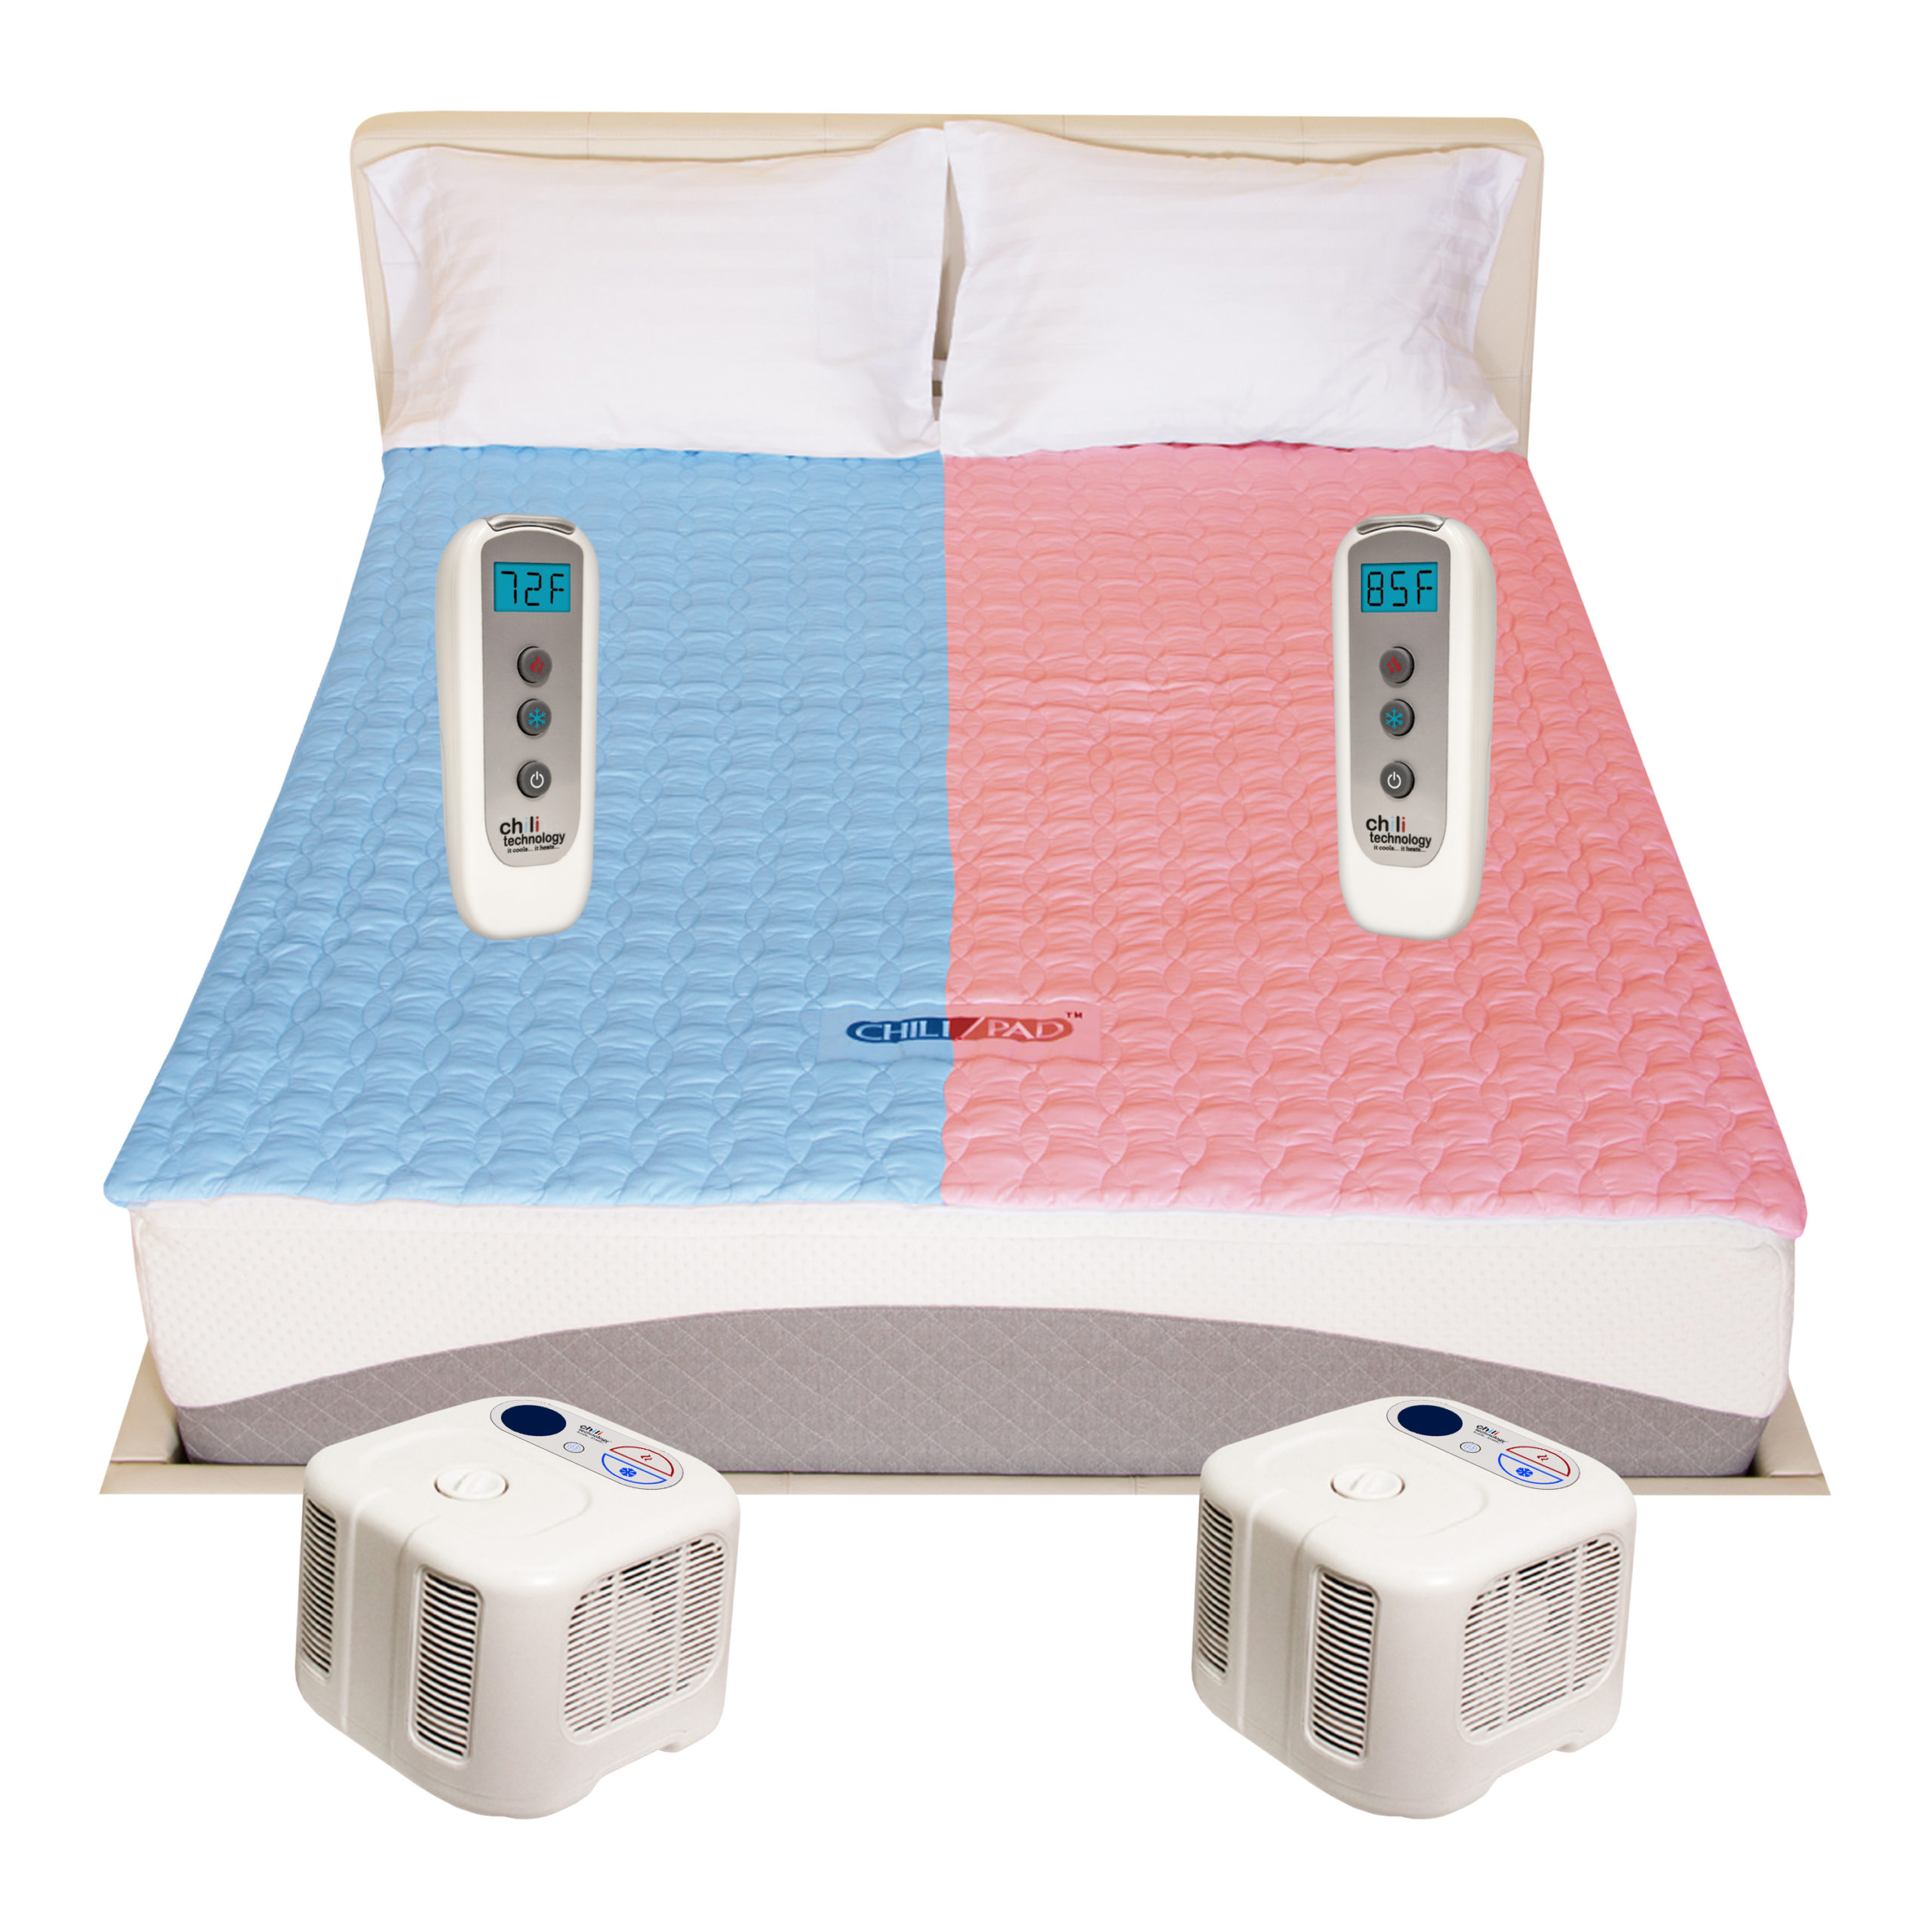 Hot Muscle Women - Chilipad|Temperature|Mattress|Cube|Sleep|Bed|Water|System|Pad|Ooler|Control|Unit|Night|Bedjet|Technology|Side|Air|Product|Review|Body|Time|Degrees|Noise|Price|Pod|Tubes|Heat|Device|Cooling|Room|King|App|Features|Size|Cover|Sleepers|Sheets|Energy|Warranty|Quality|Mattress Pad|Control Unit|Cube Sleep System|Sleep Pod|Distilled Water|Remote Control|Sleep System|Desired Temperature|Water Tank|Chilipad Cube|Chili Technology|Deep Sleep|Pro Cover|Ooler Sleep System|Hydrogen Peroxide|Cool Mesh|Sleep Temperature|Fitted Sheet|Pod Pro|Sleep Quality|Smartphone App|Sleep Systems|Chilipad Sleep System|New Mattress|Sleep Trial|Full Refund|Mattress Topper|Body Heat|Air Flow|Chilipad Review